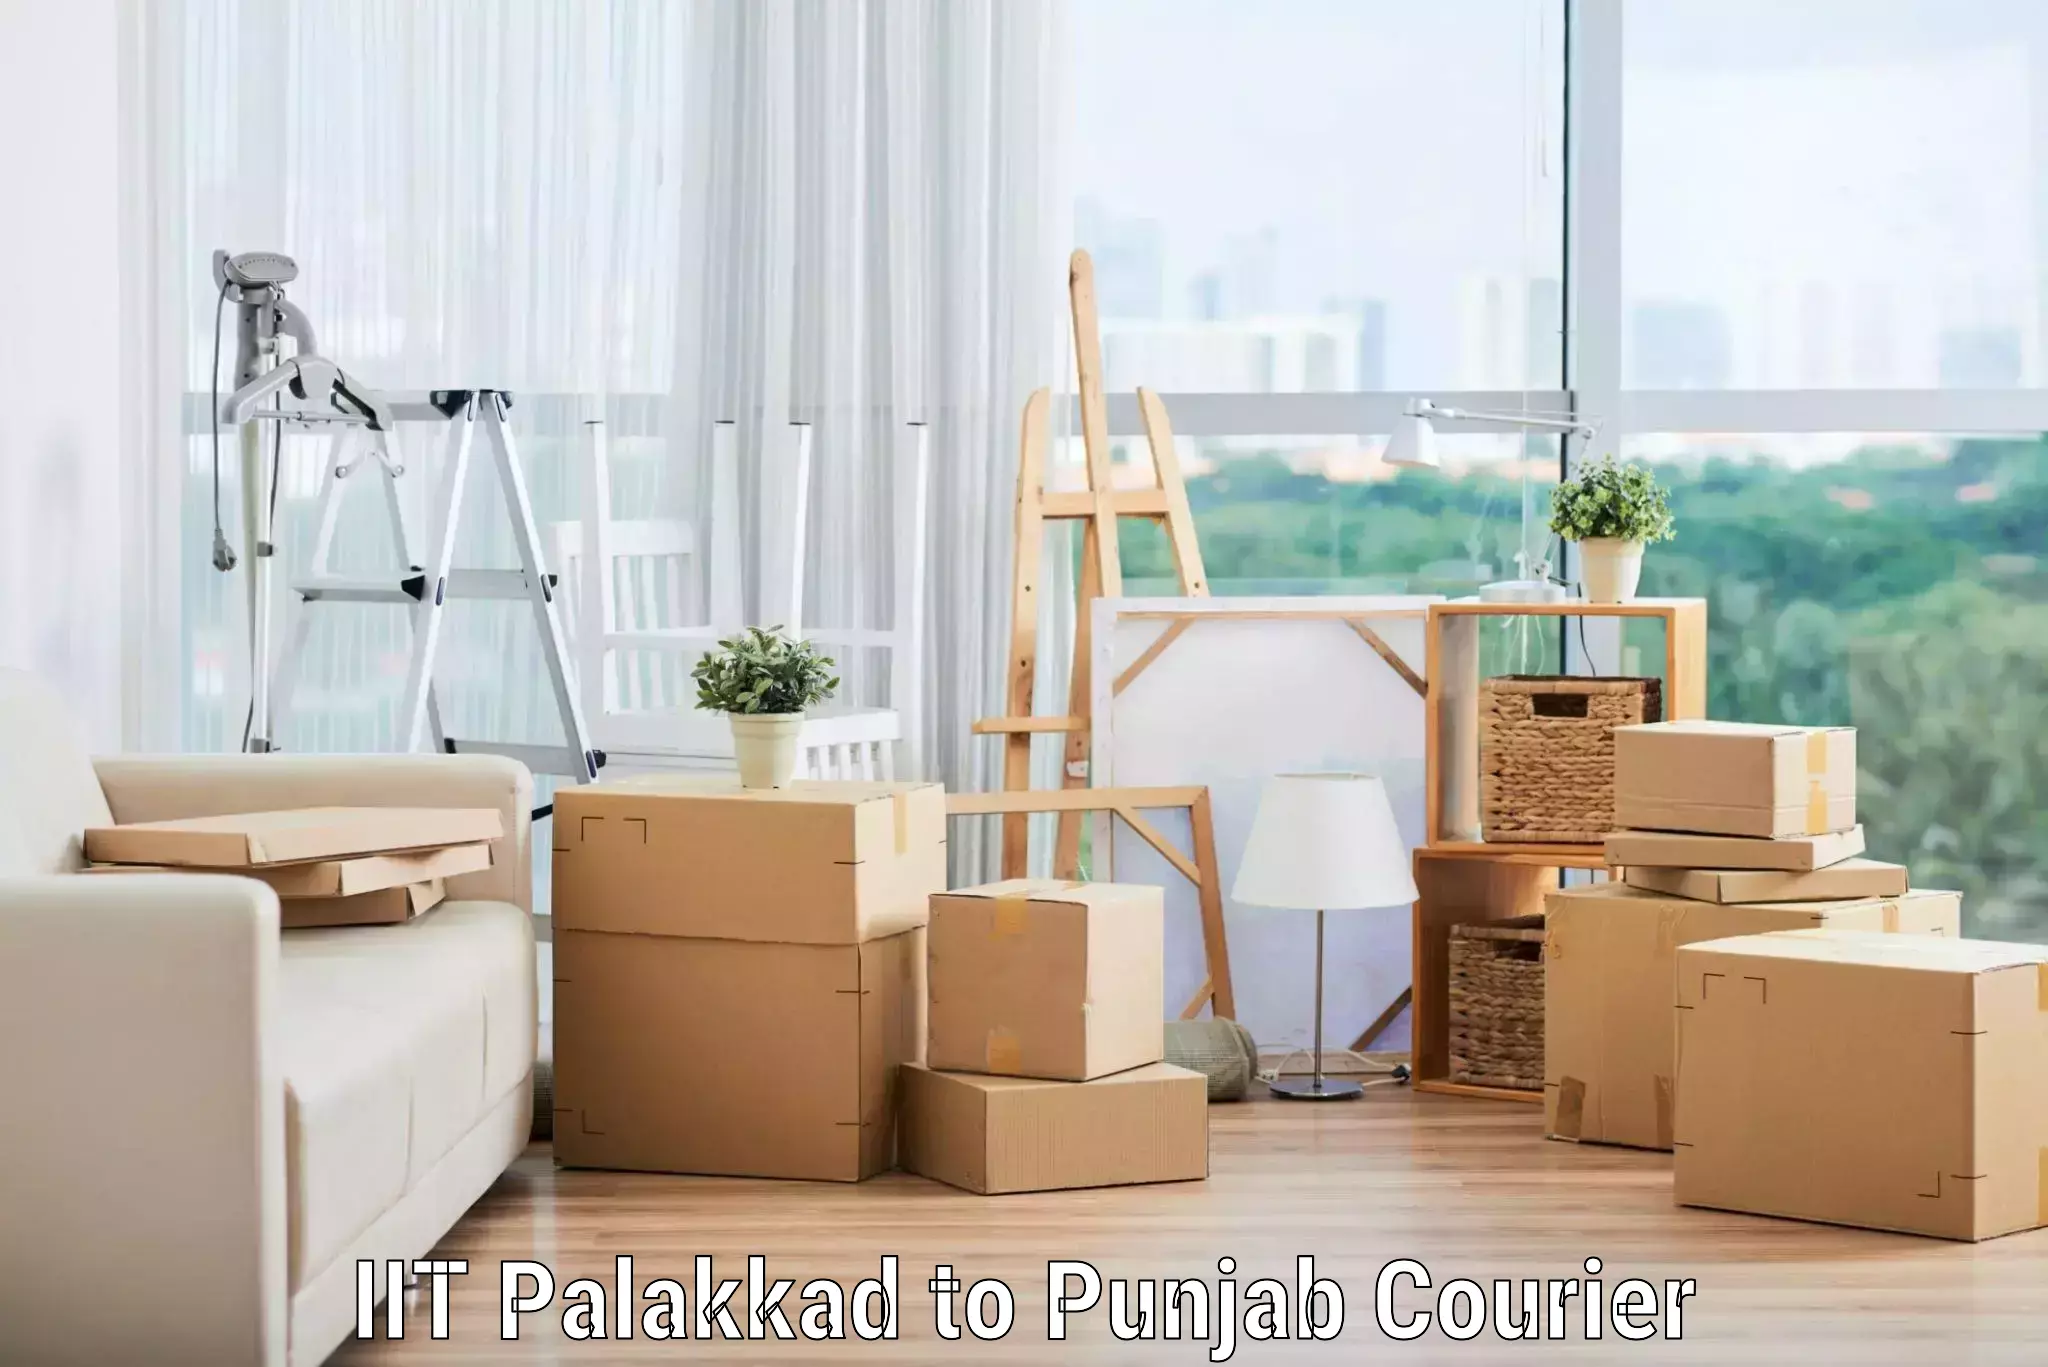 Household moving experts IIT Palakkad to Patiala